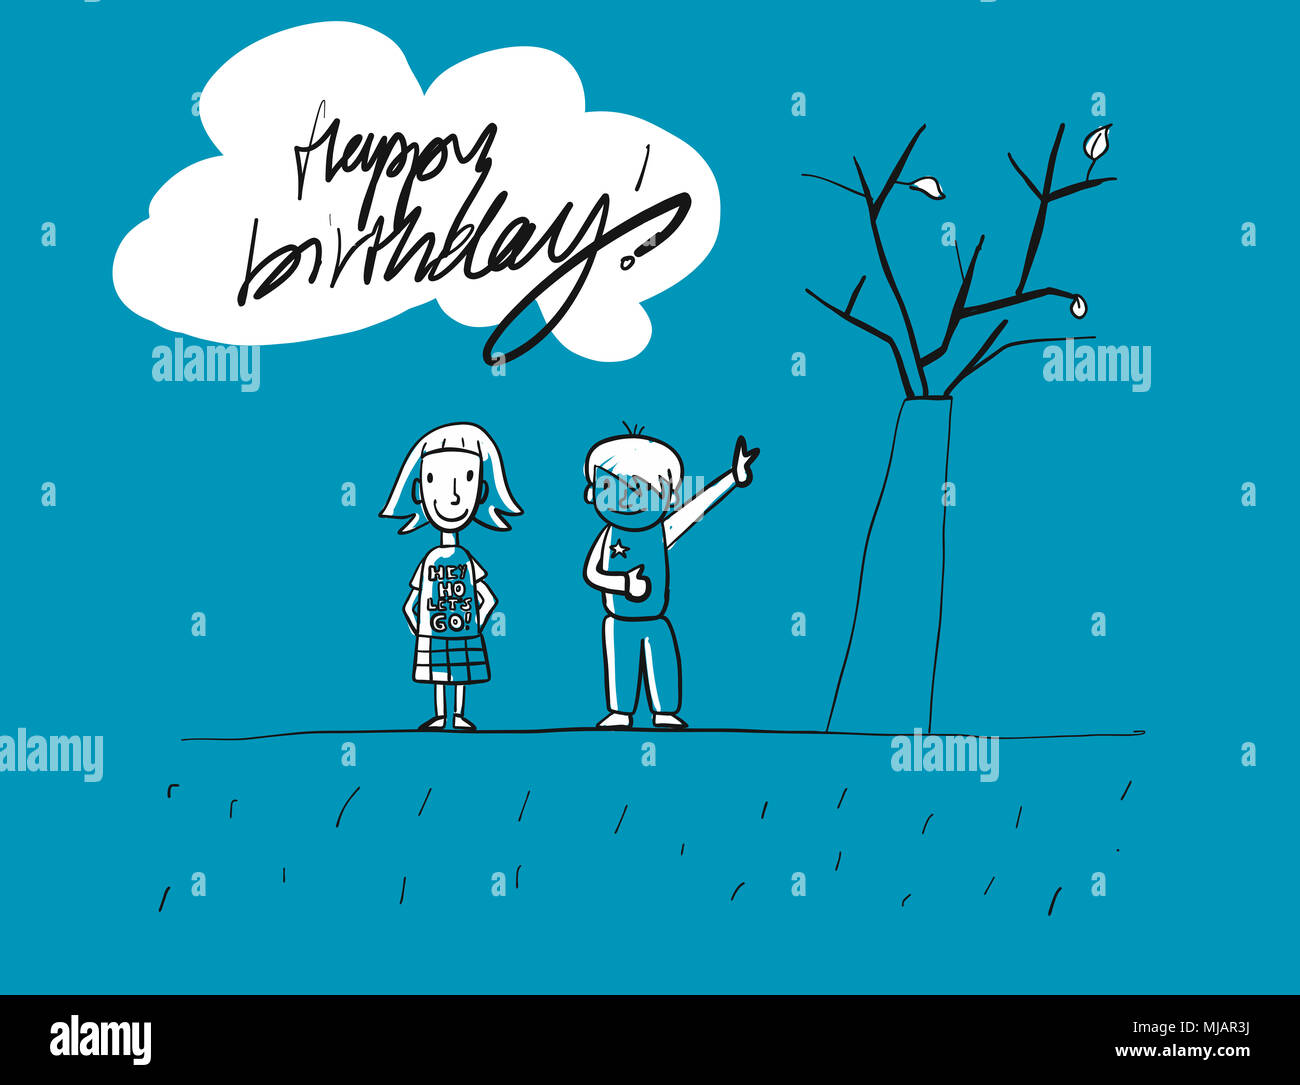 Happy birthday Grunge Kids Greeting Card, Hand-drawn Vector Sketches, Blue Colored Artwork Stock Photo